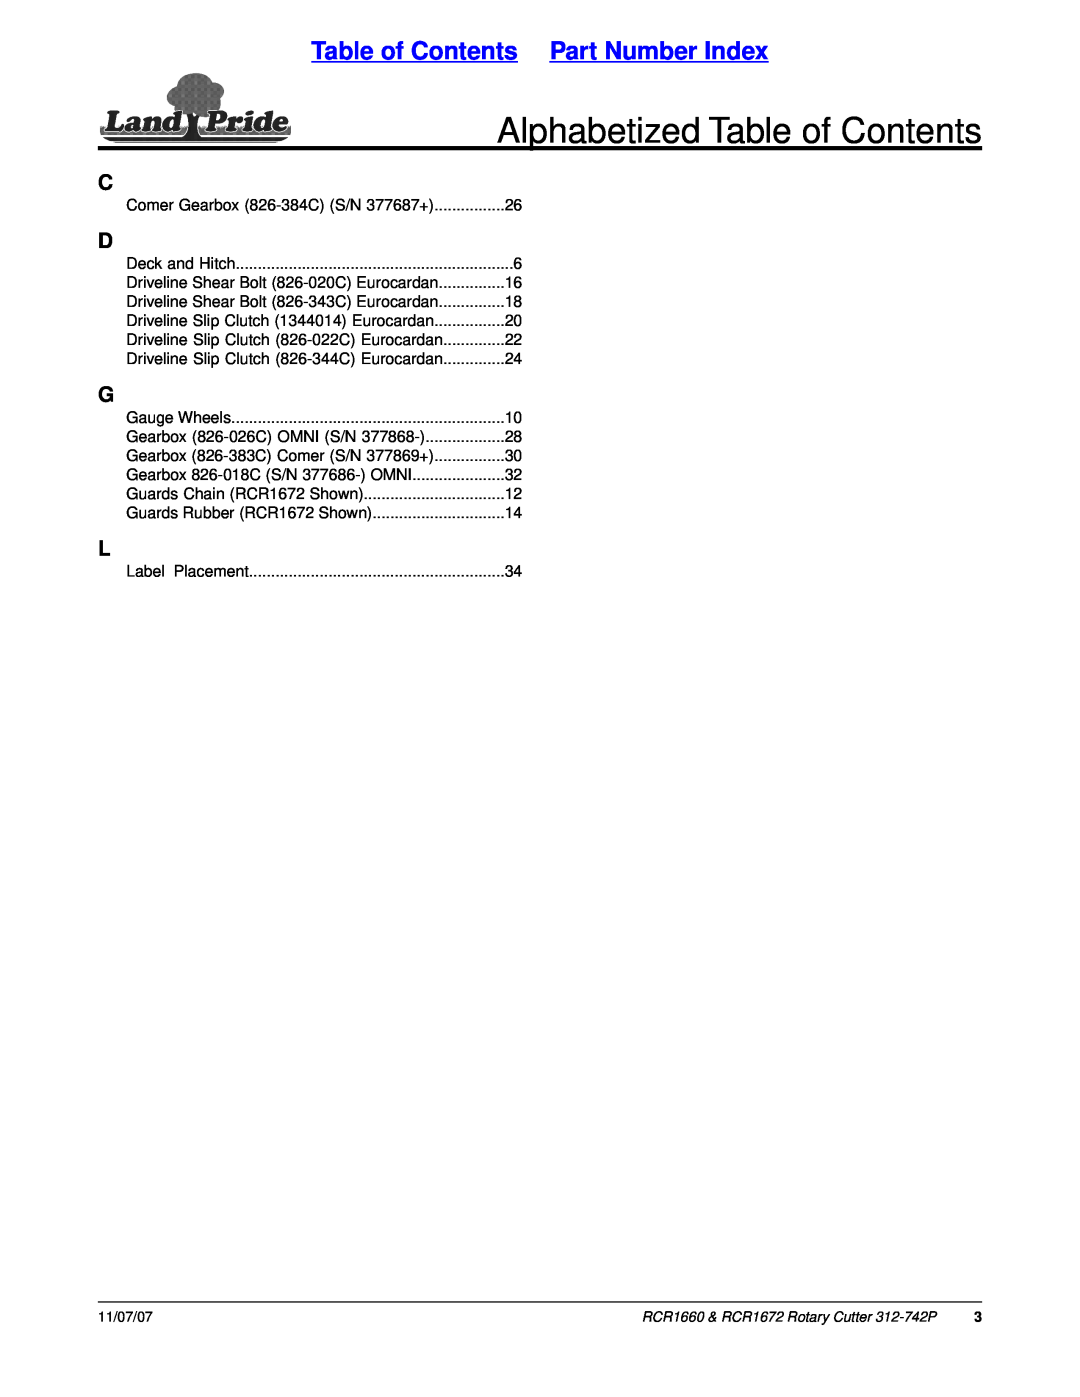 Land Pride RCR1660 manual Alphabetized Table of Contents, Table of Contents Part Number Index 